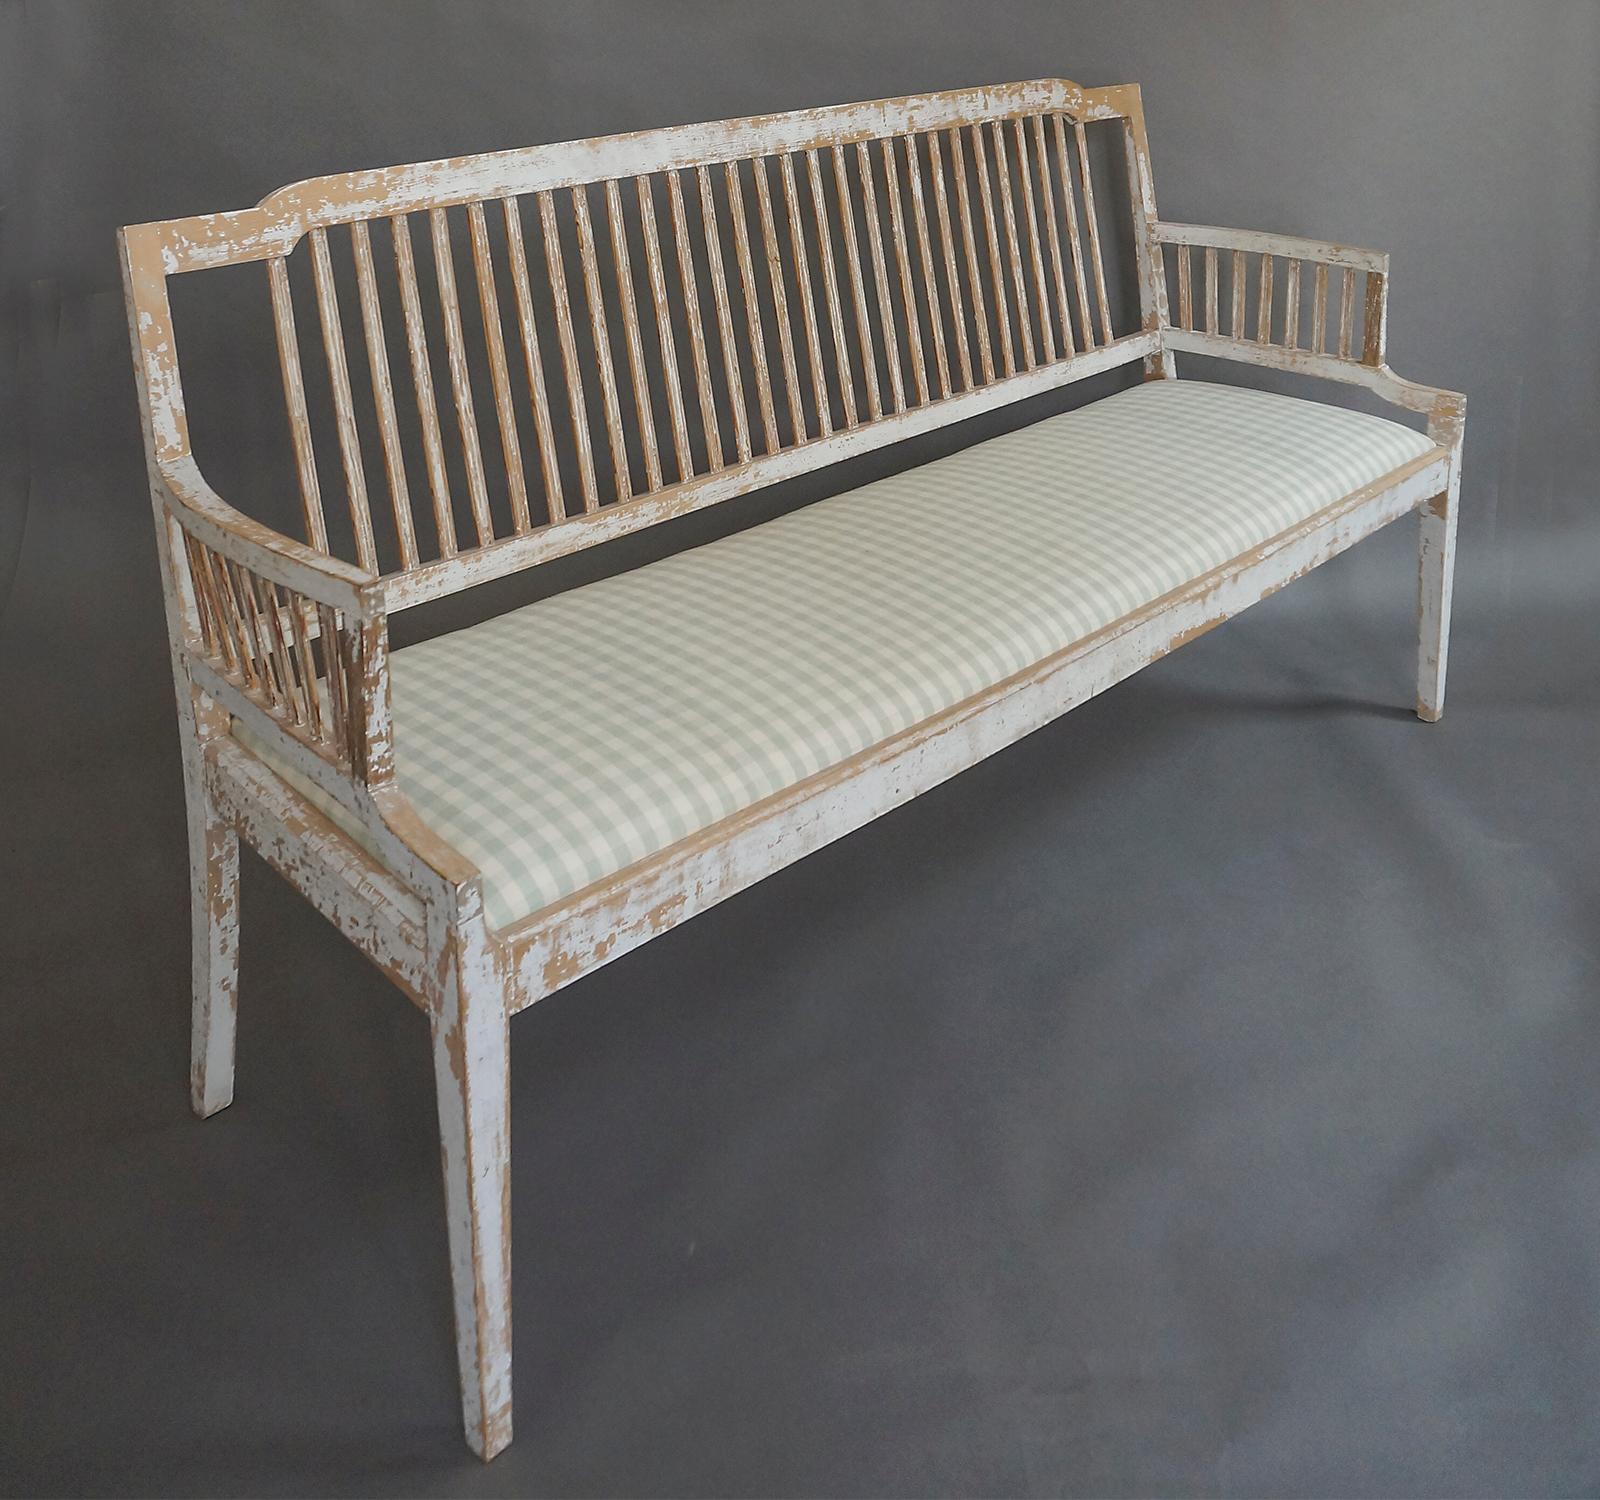 Swedish stick-back settee in the Gustavian style, circa 1860, scraped to the original paint. The slip seat has been newly upholstered in a green homespun linen check.